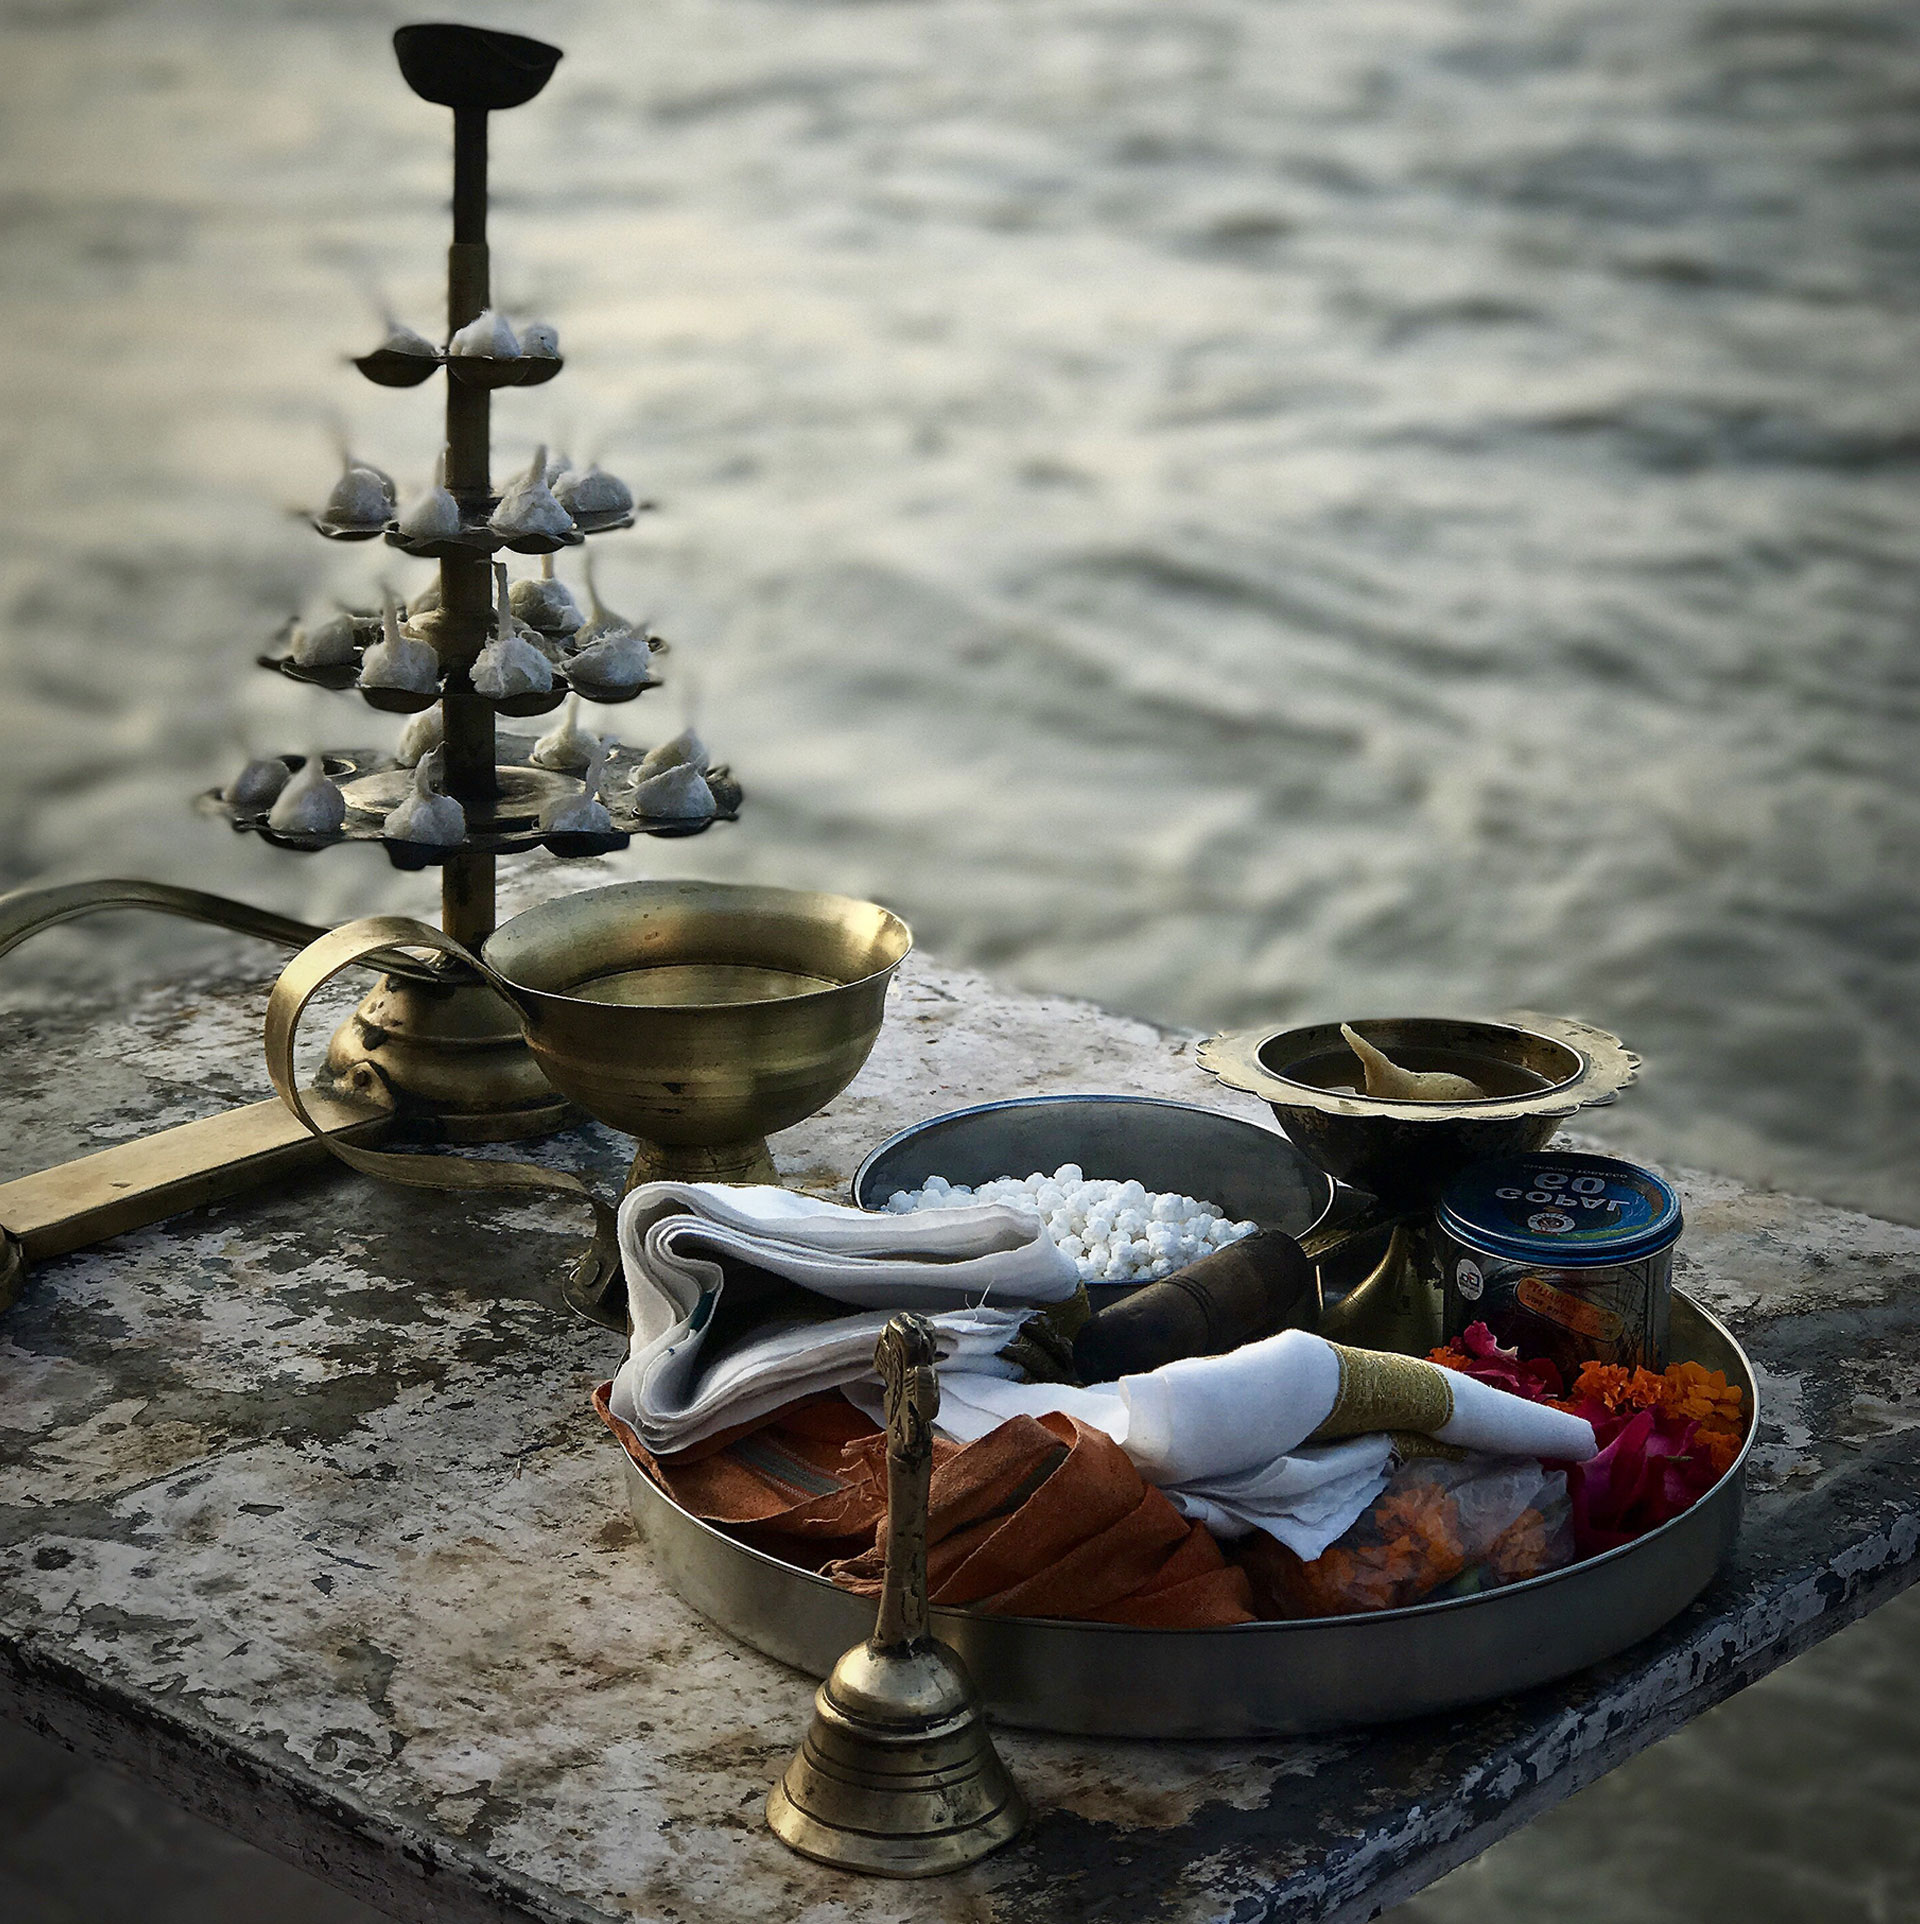 puja offering